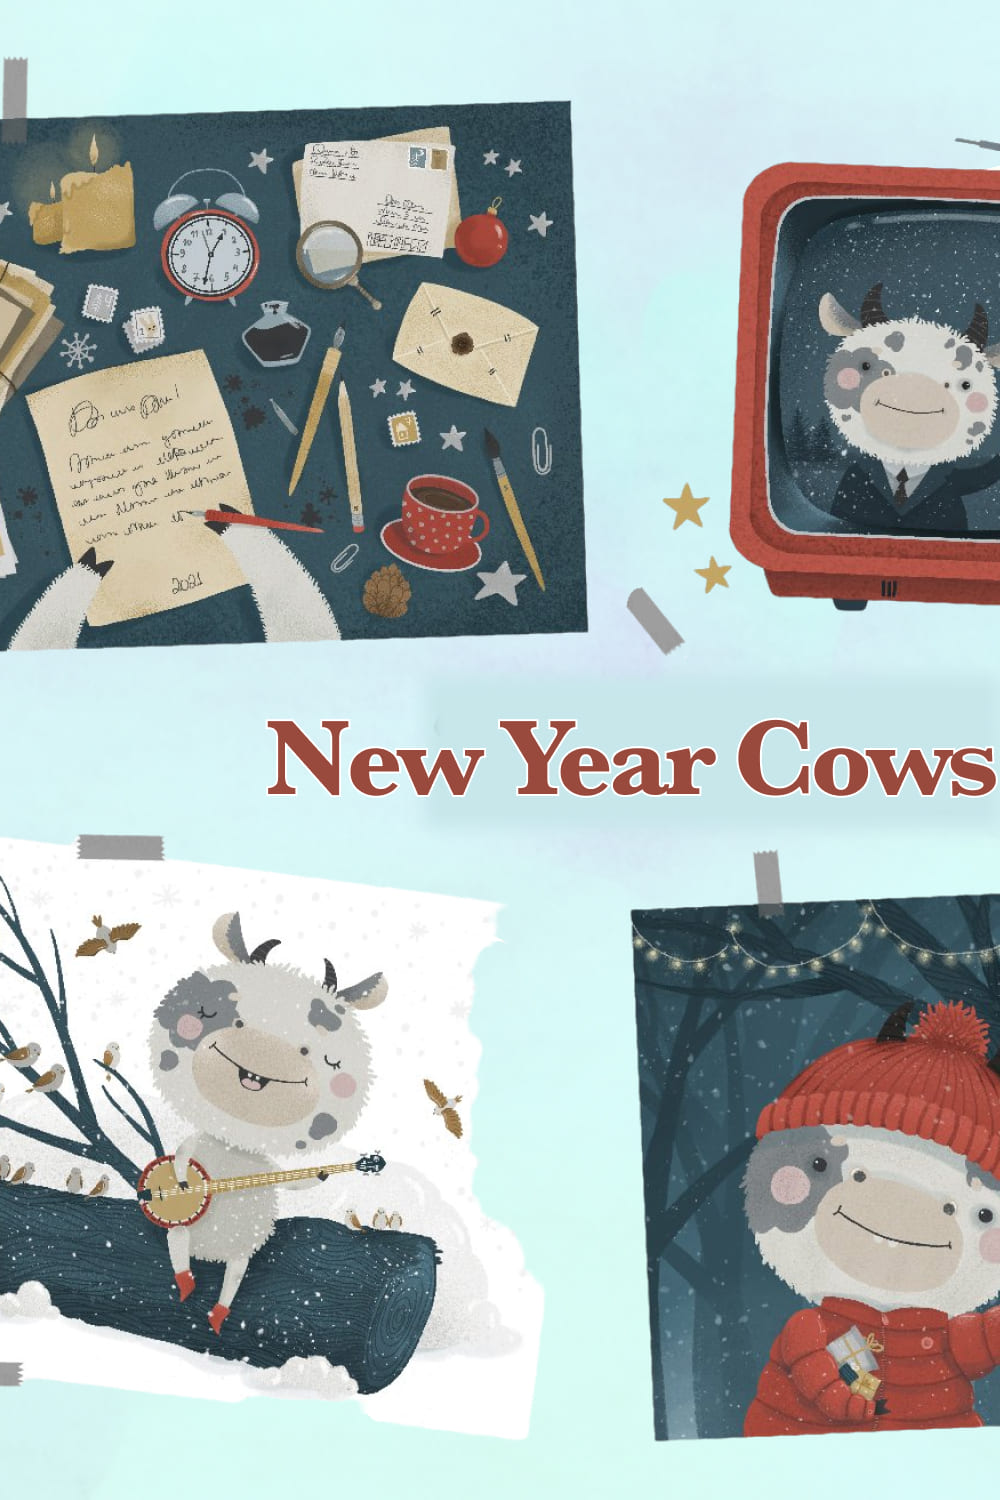 New Year Cows - Pinterest image preview.